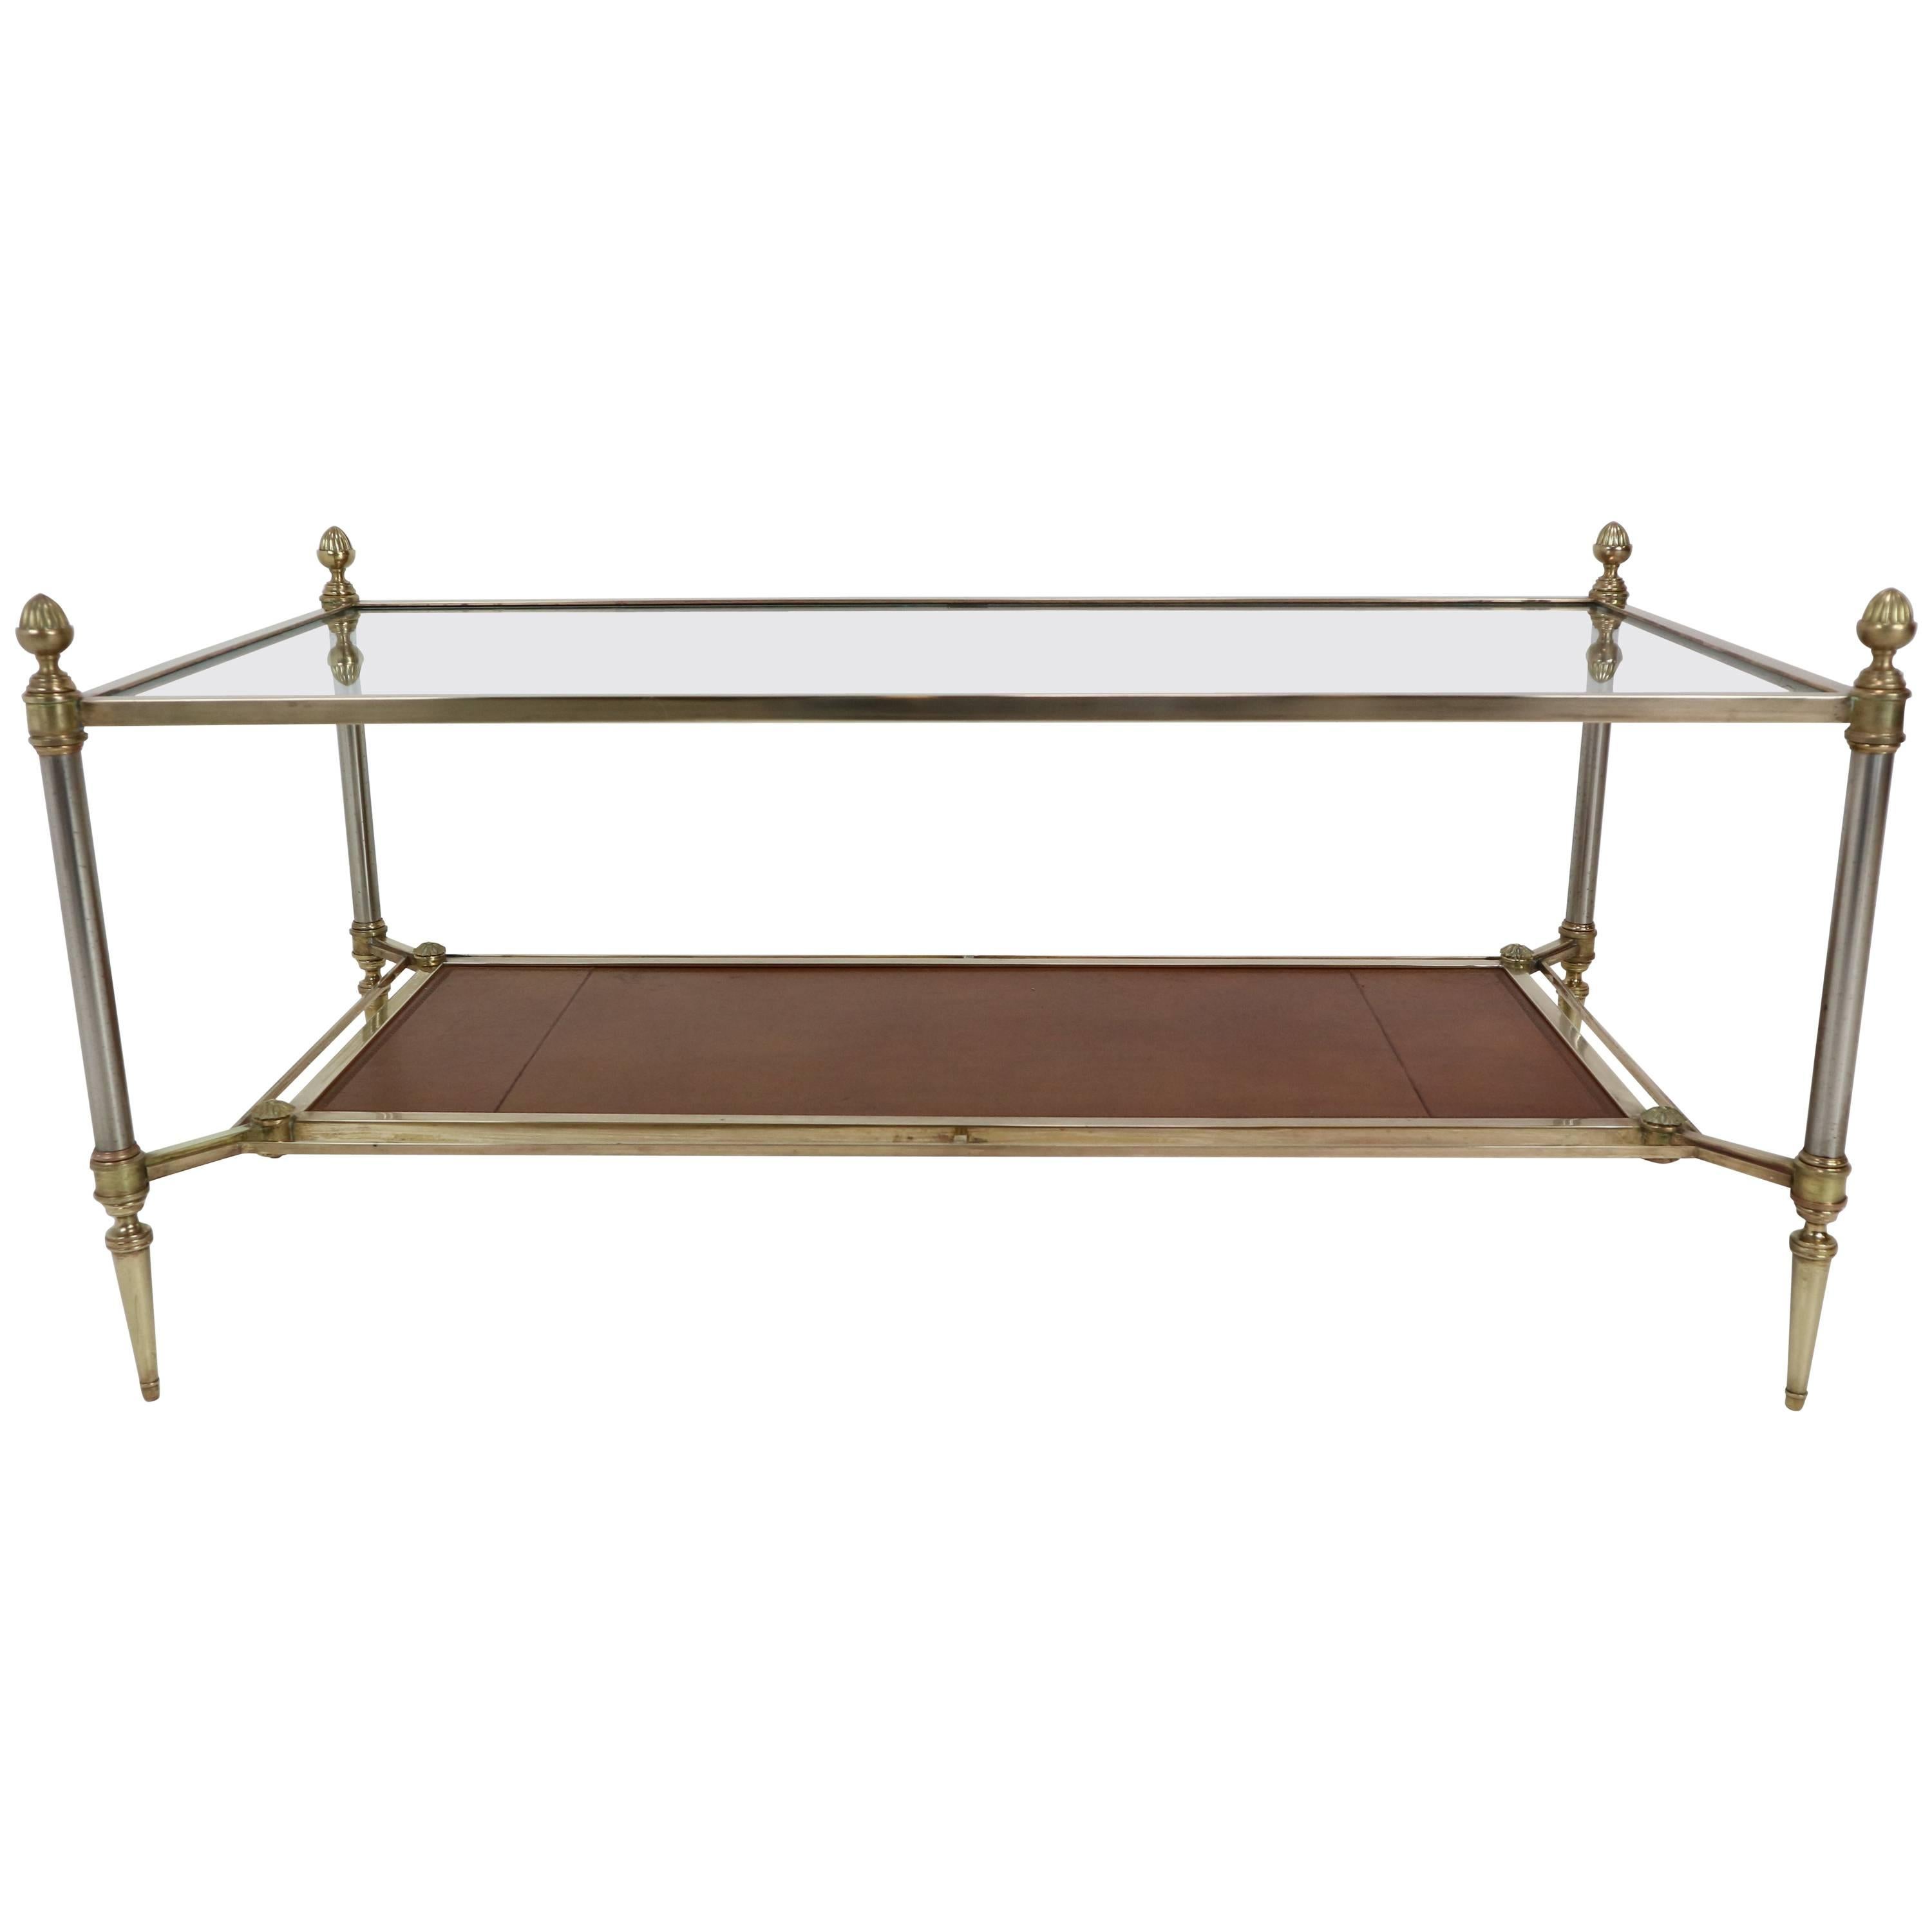 Maison Jansen Bronze, Brass and Leather Neoclassical Coffee Table